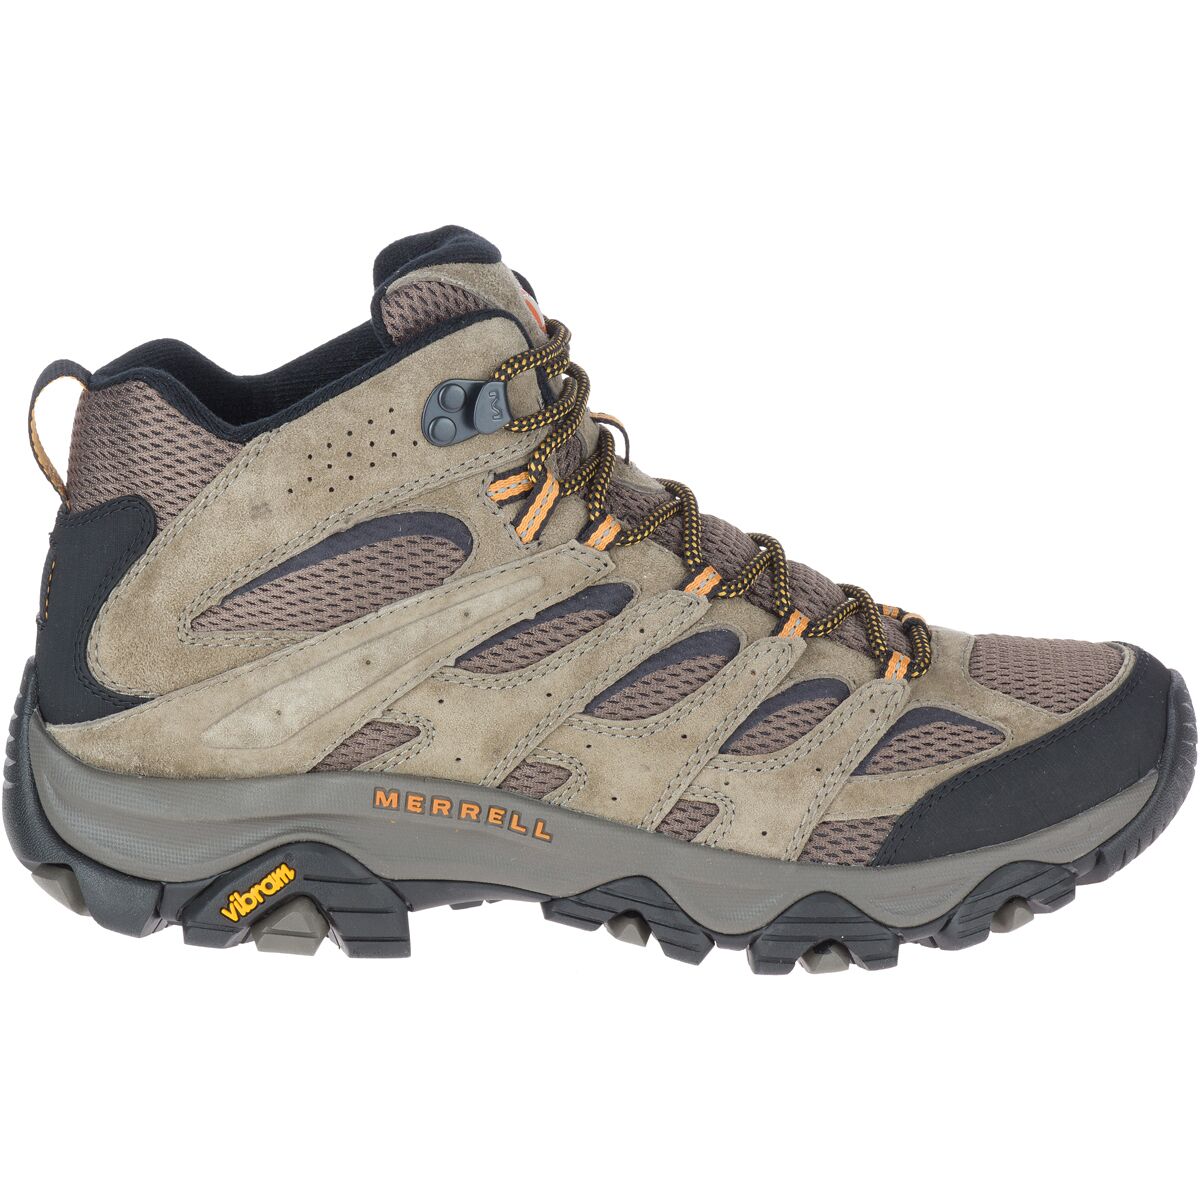 Moab 3 Mid Hiking Boot - Wide - Men